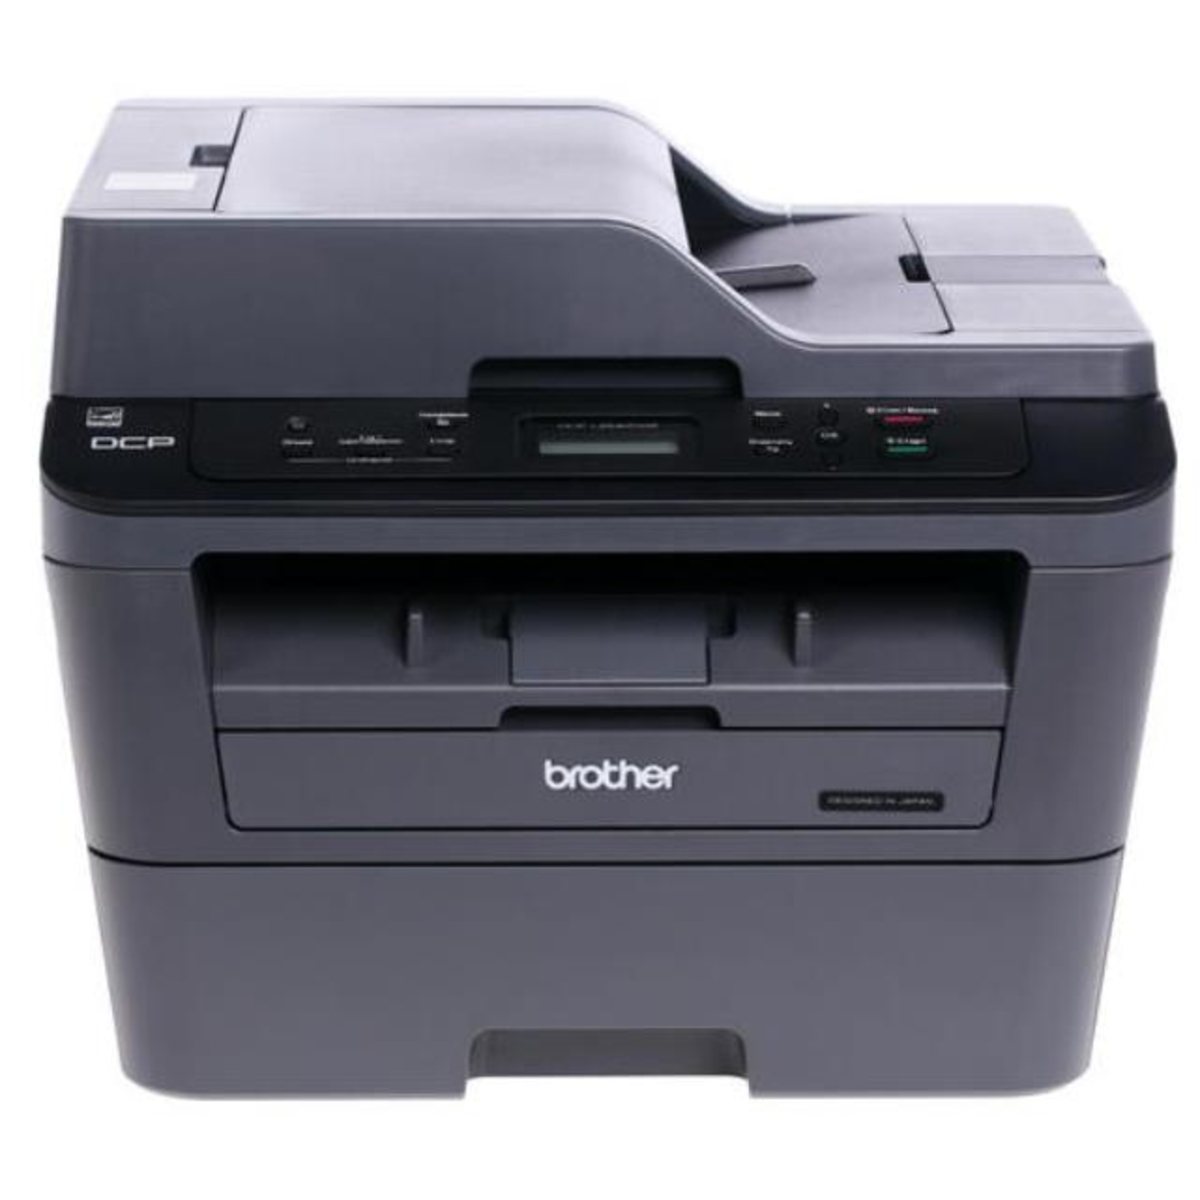 Brother DCP-l2540dnr. МФУ brother 2540 DNR. МФУ brother MFC-l2700dnr. МФУ brother DCP-l2540dnr. Brother l2720dwr